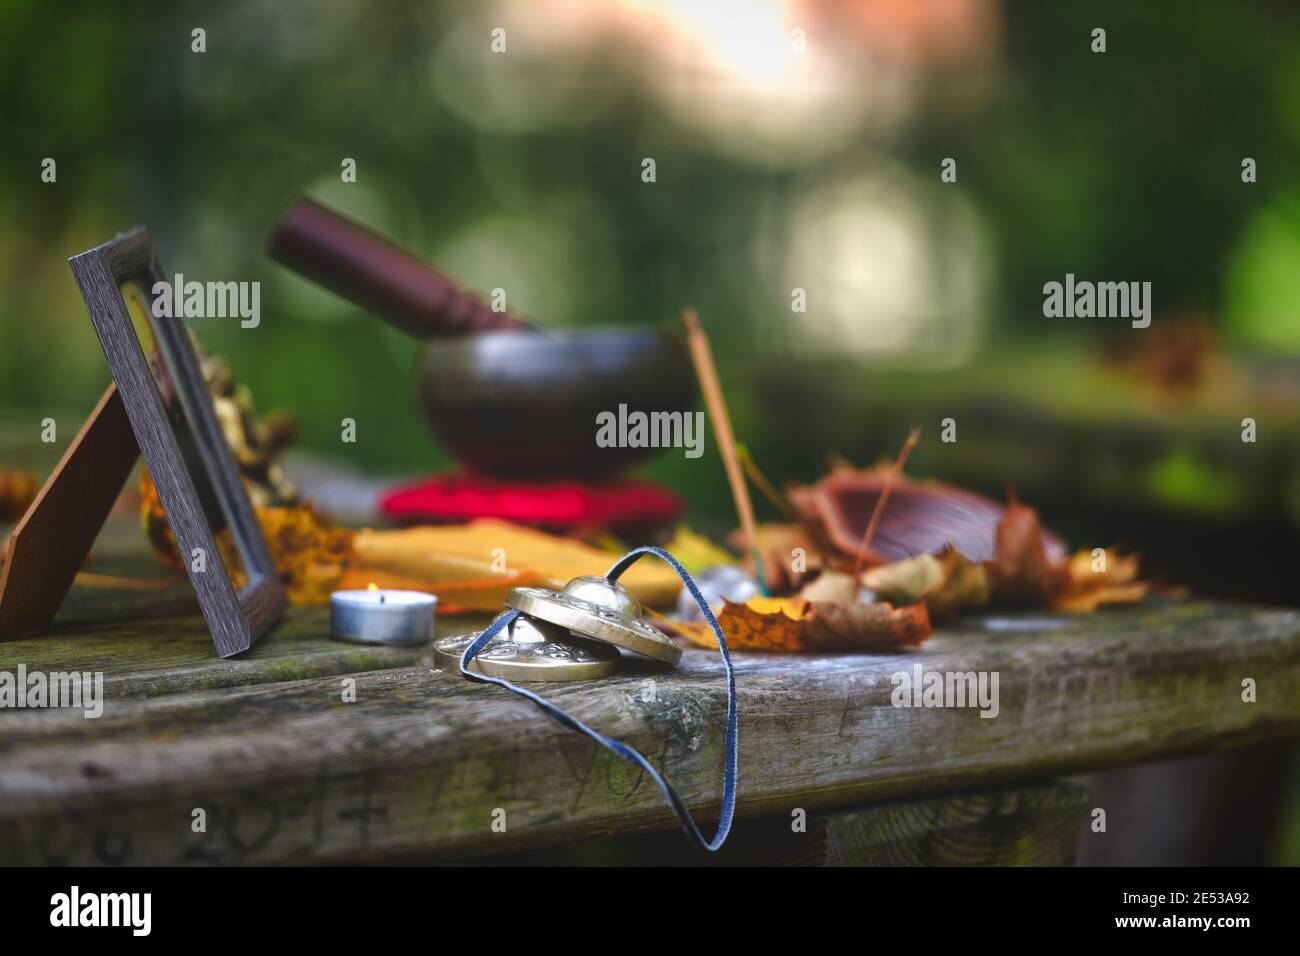 Yoga meditation objects on wooden table outdoors Stock Photo